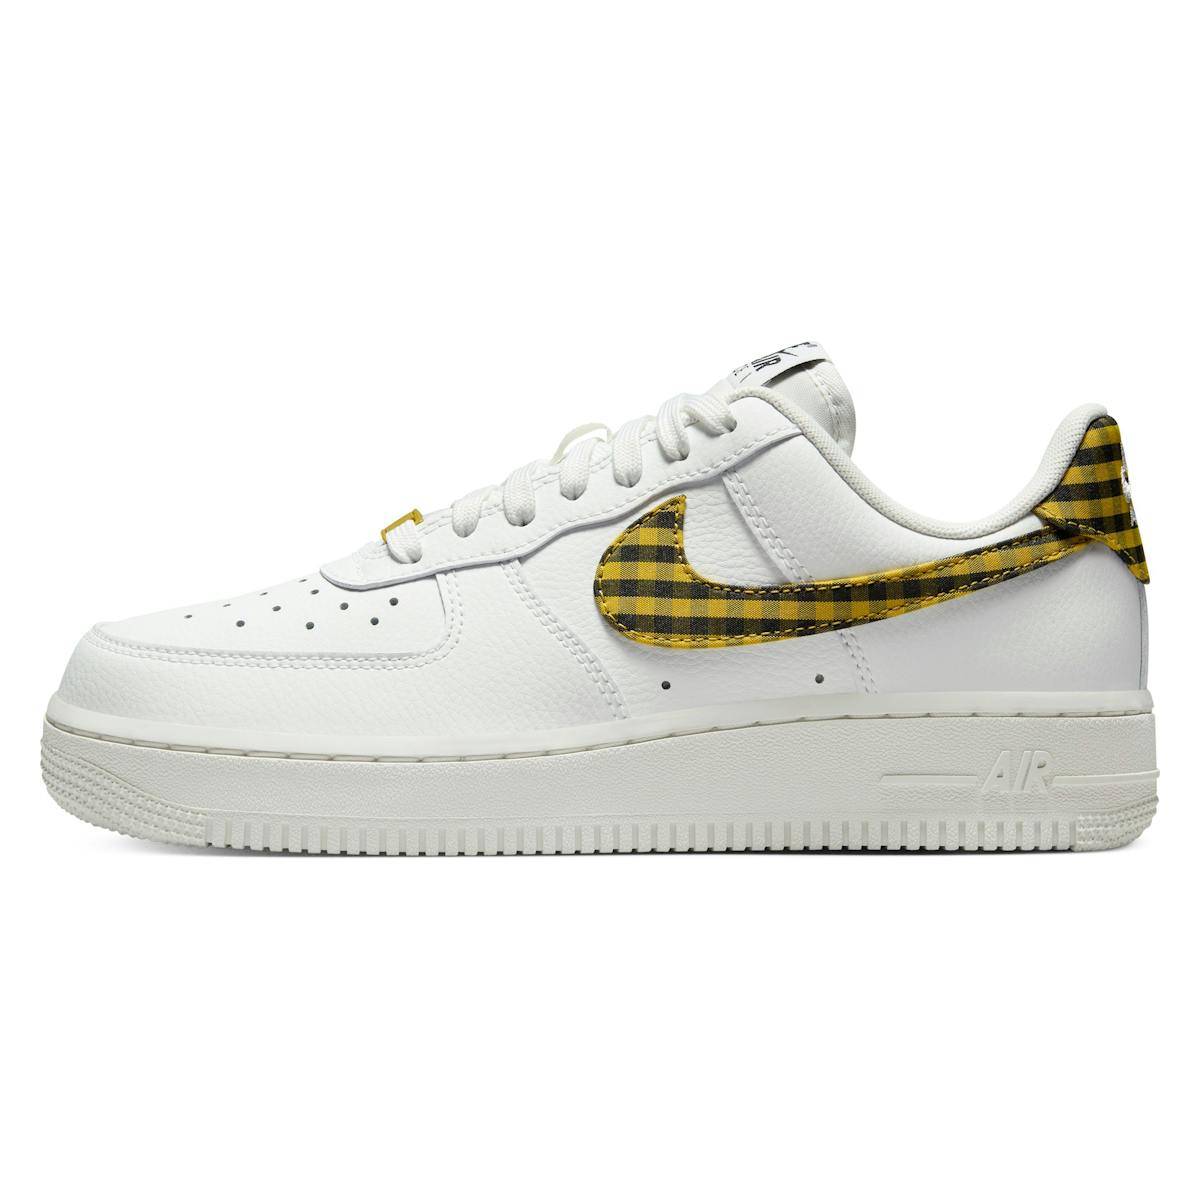 Nike Air Force 1 '07 Wmns "Yellow Black Gingham"